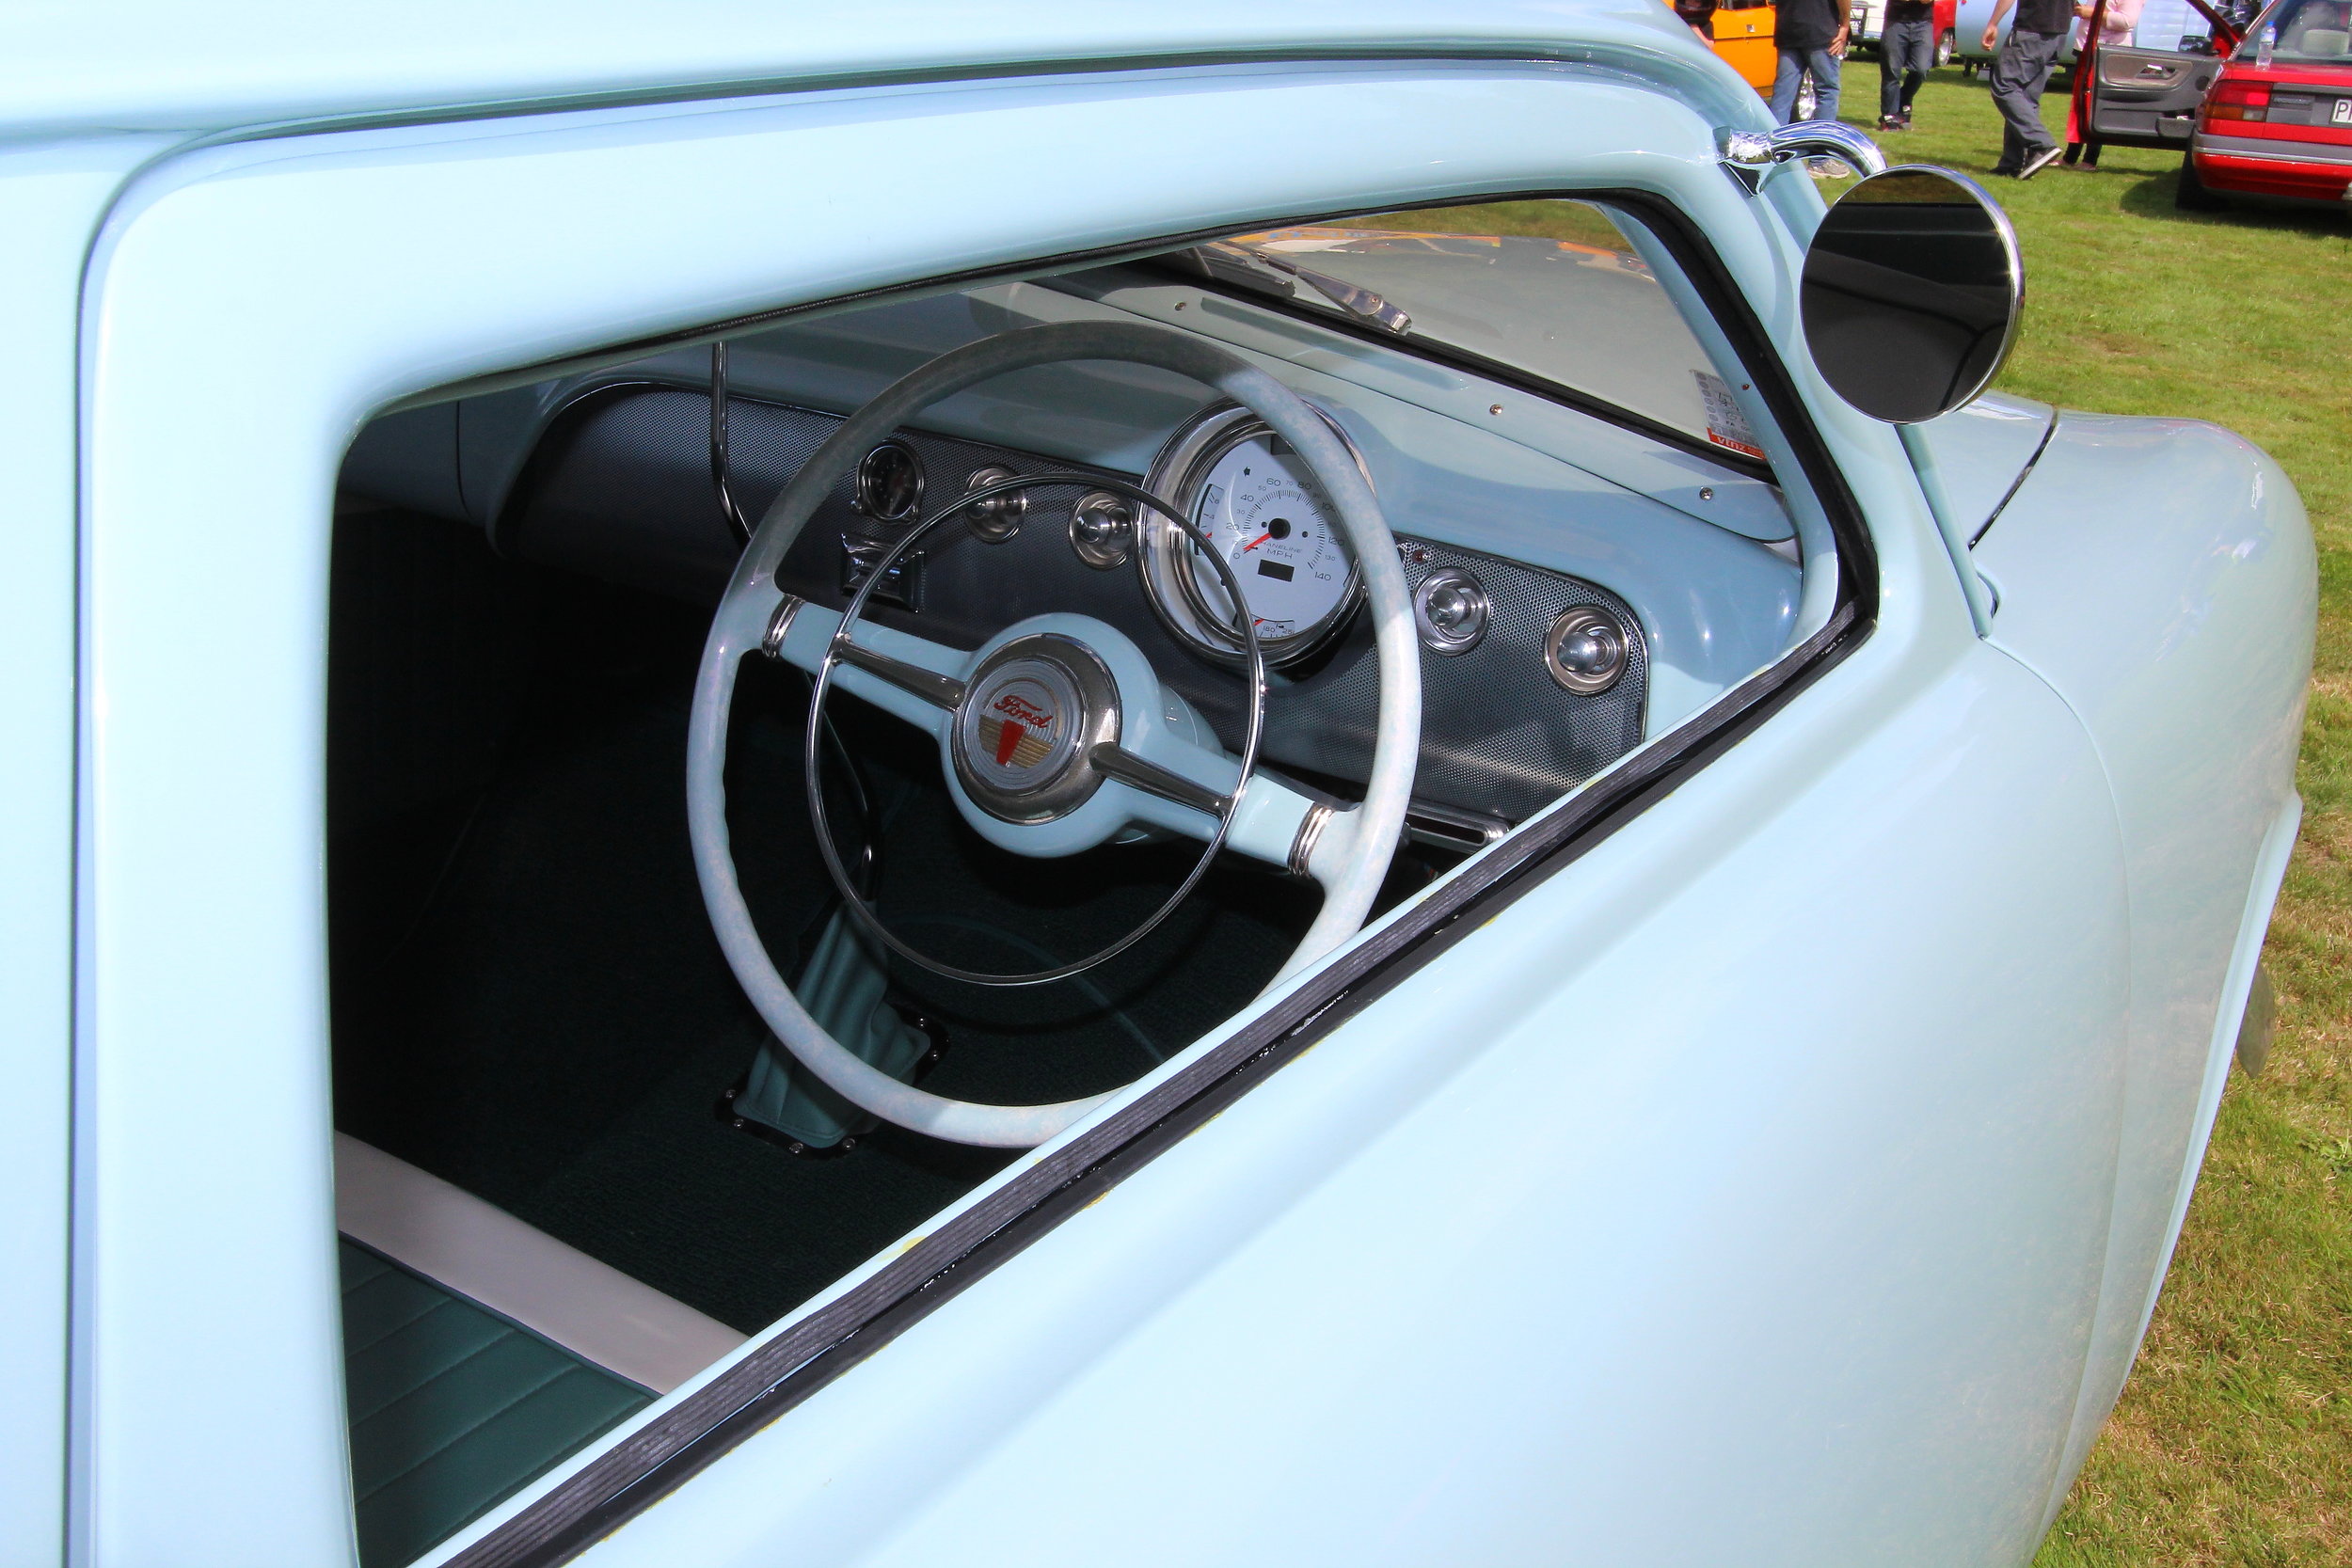  Interior of the winning '49 Ford 